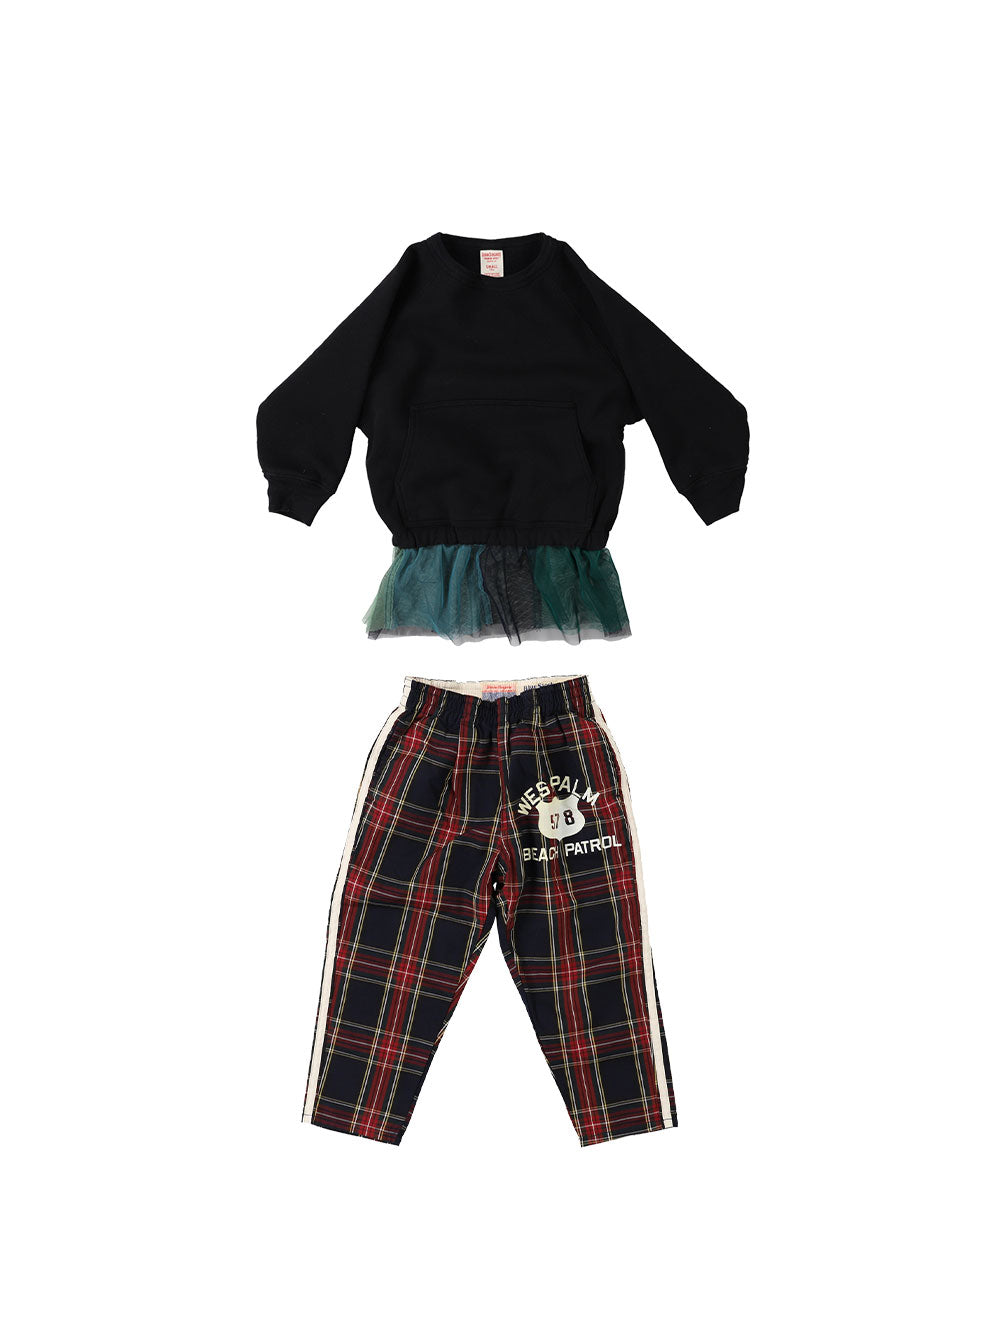 Black and Red Plaid  Pants